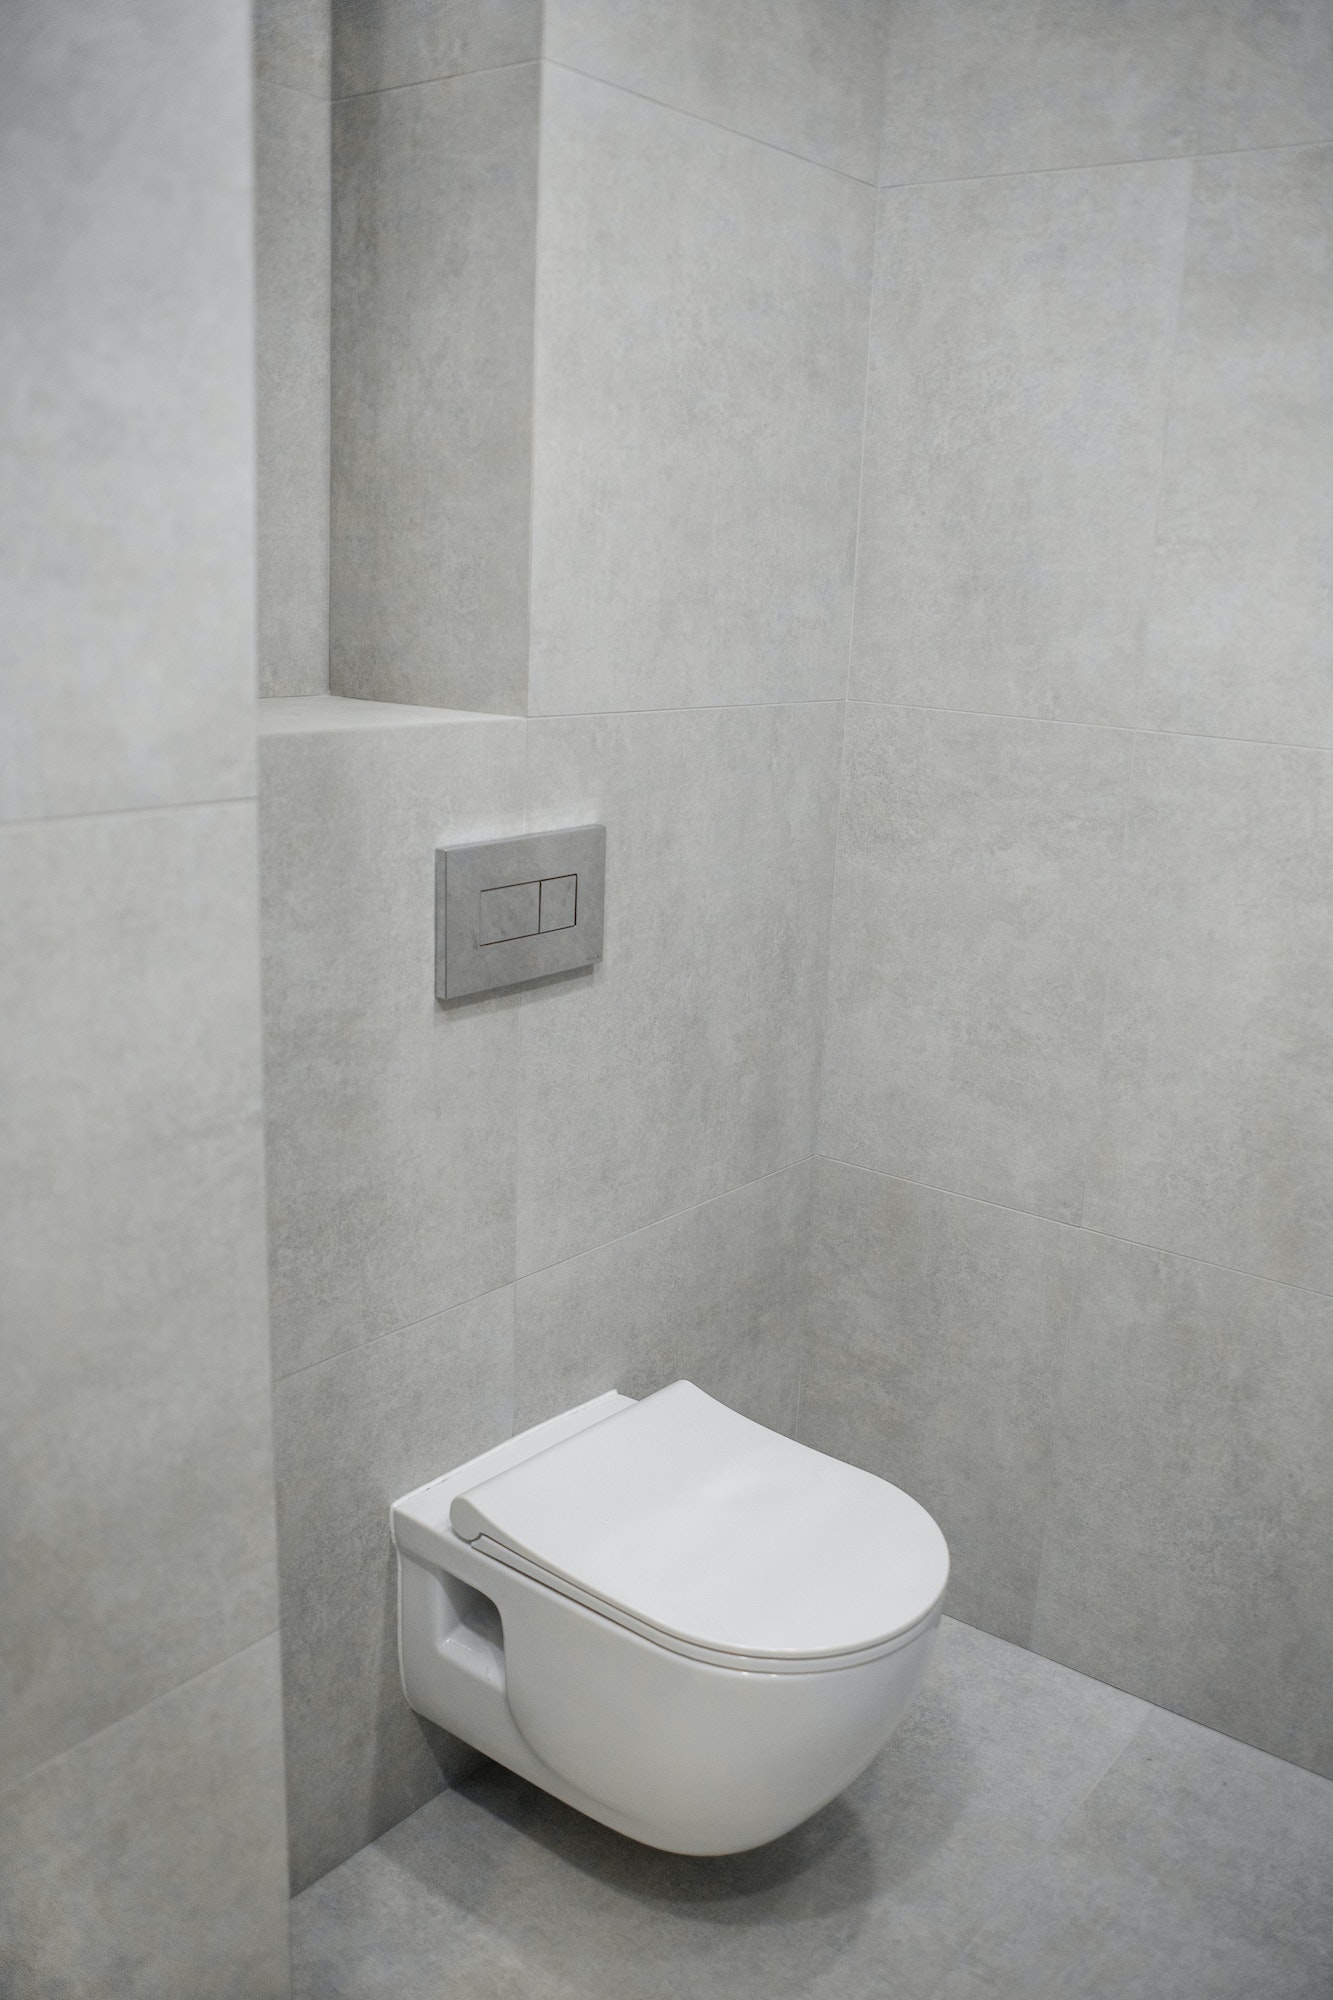 Toilet with built-in toilet in gray tones. The built-in toilet is made as installation, all elements